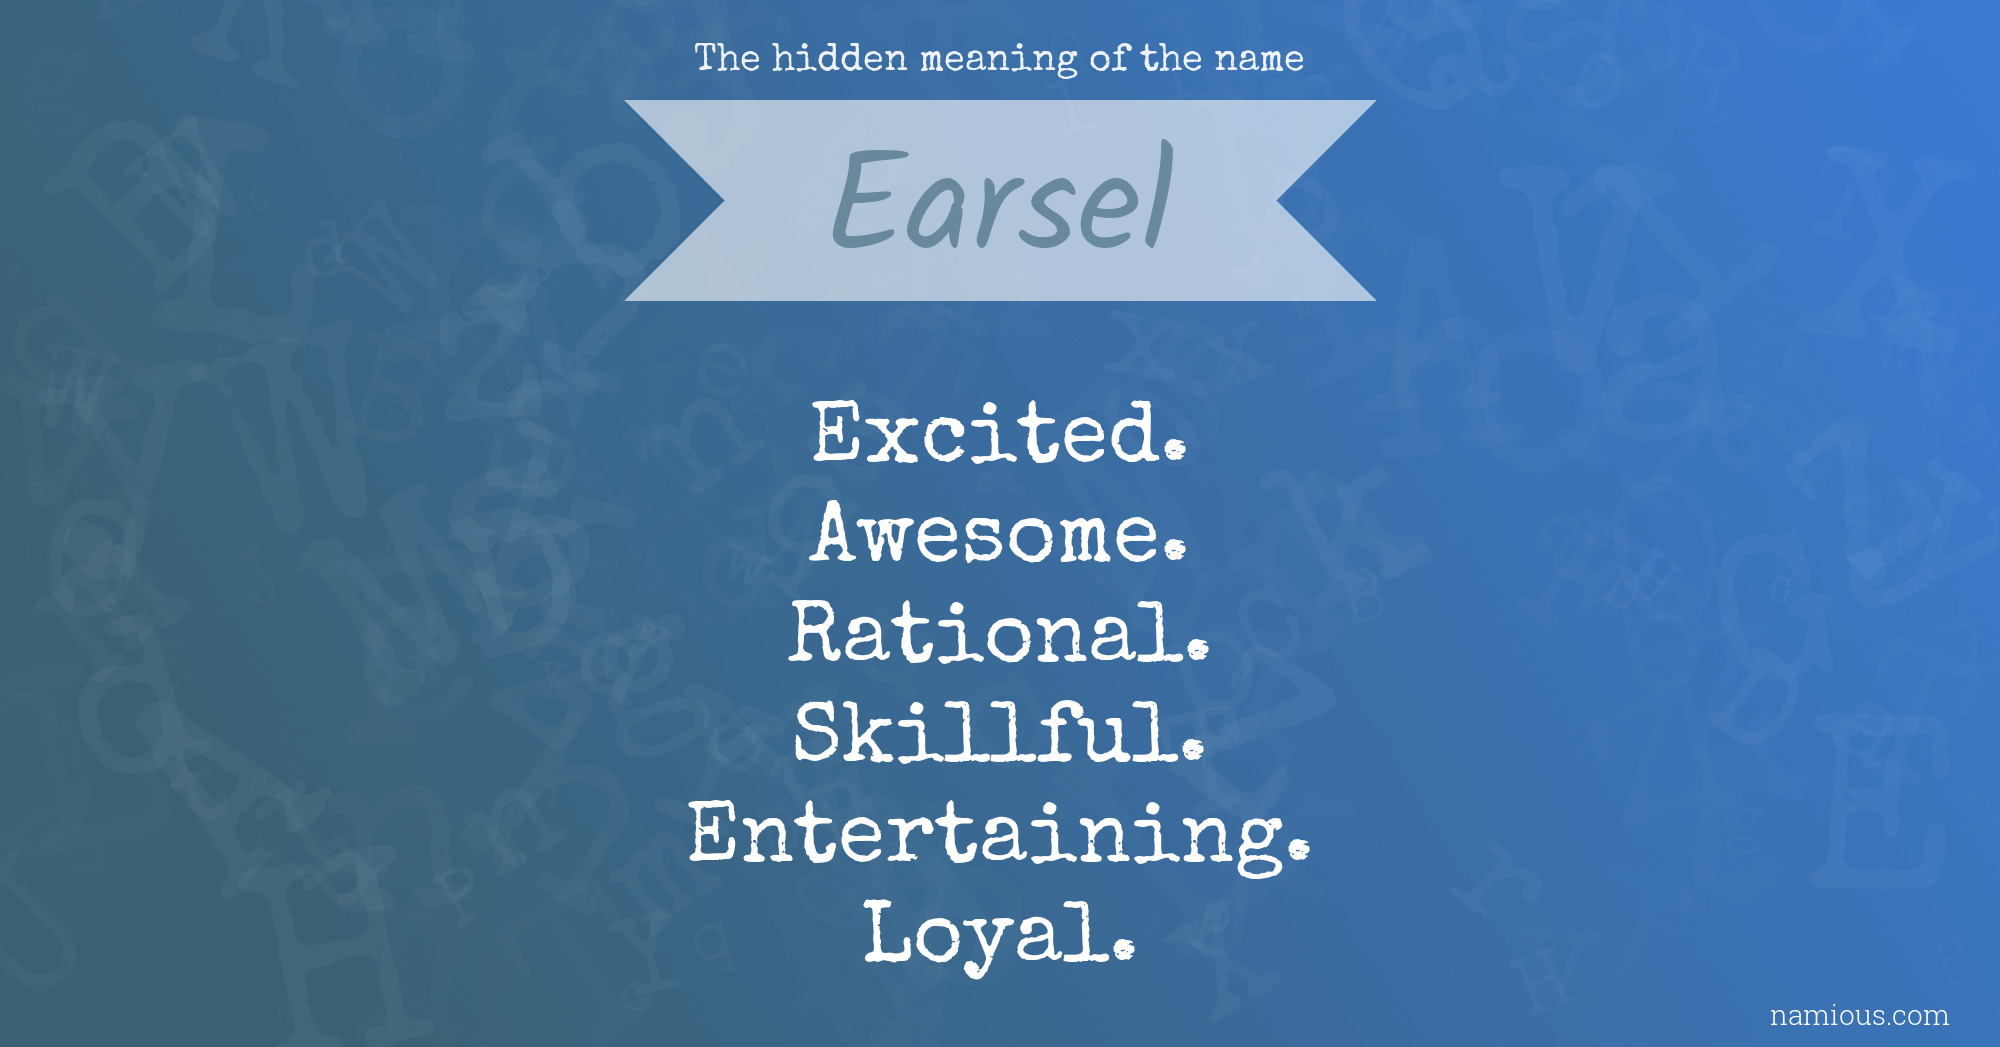 The hidden meaning of the name Earsel